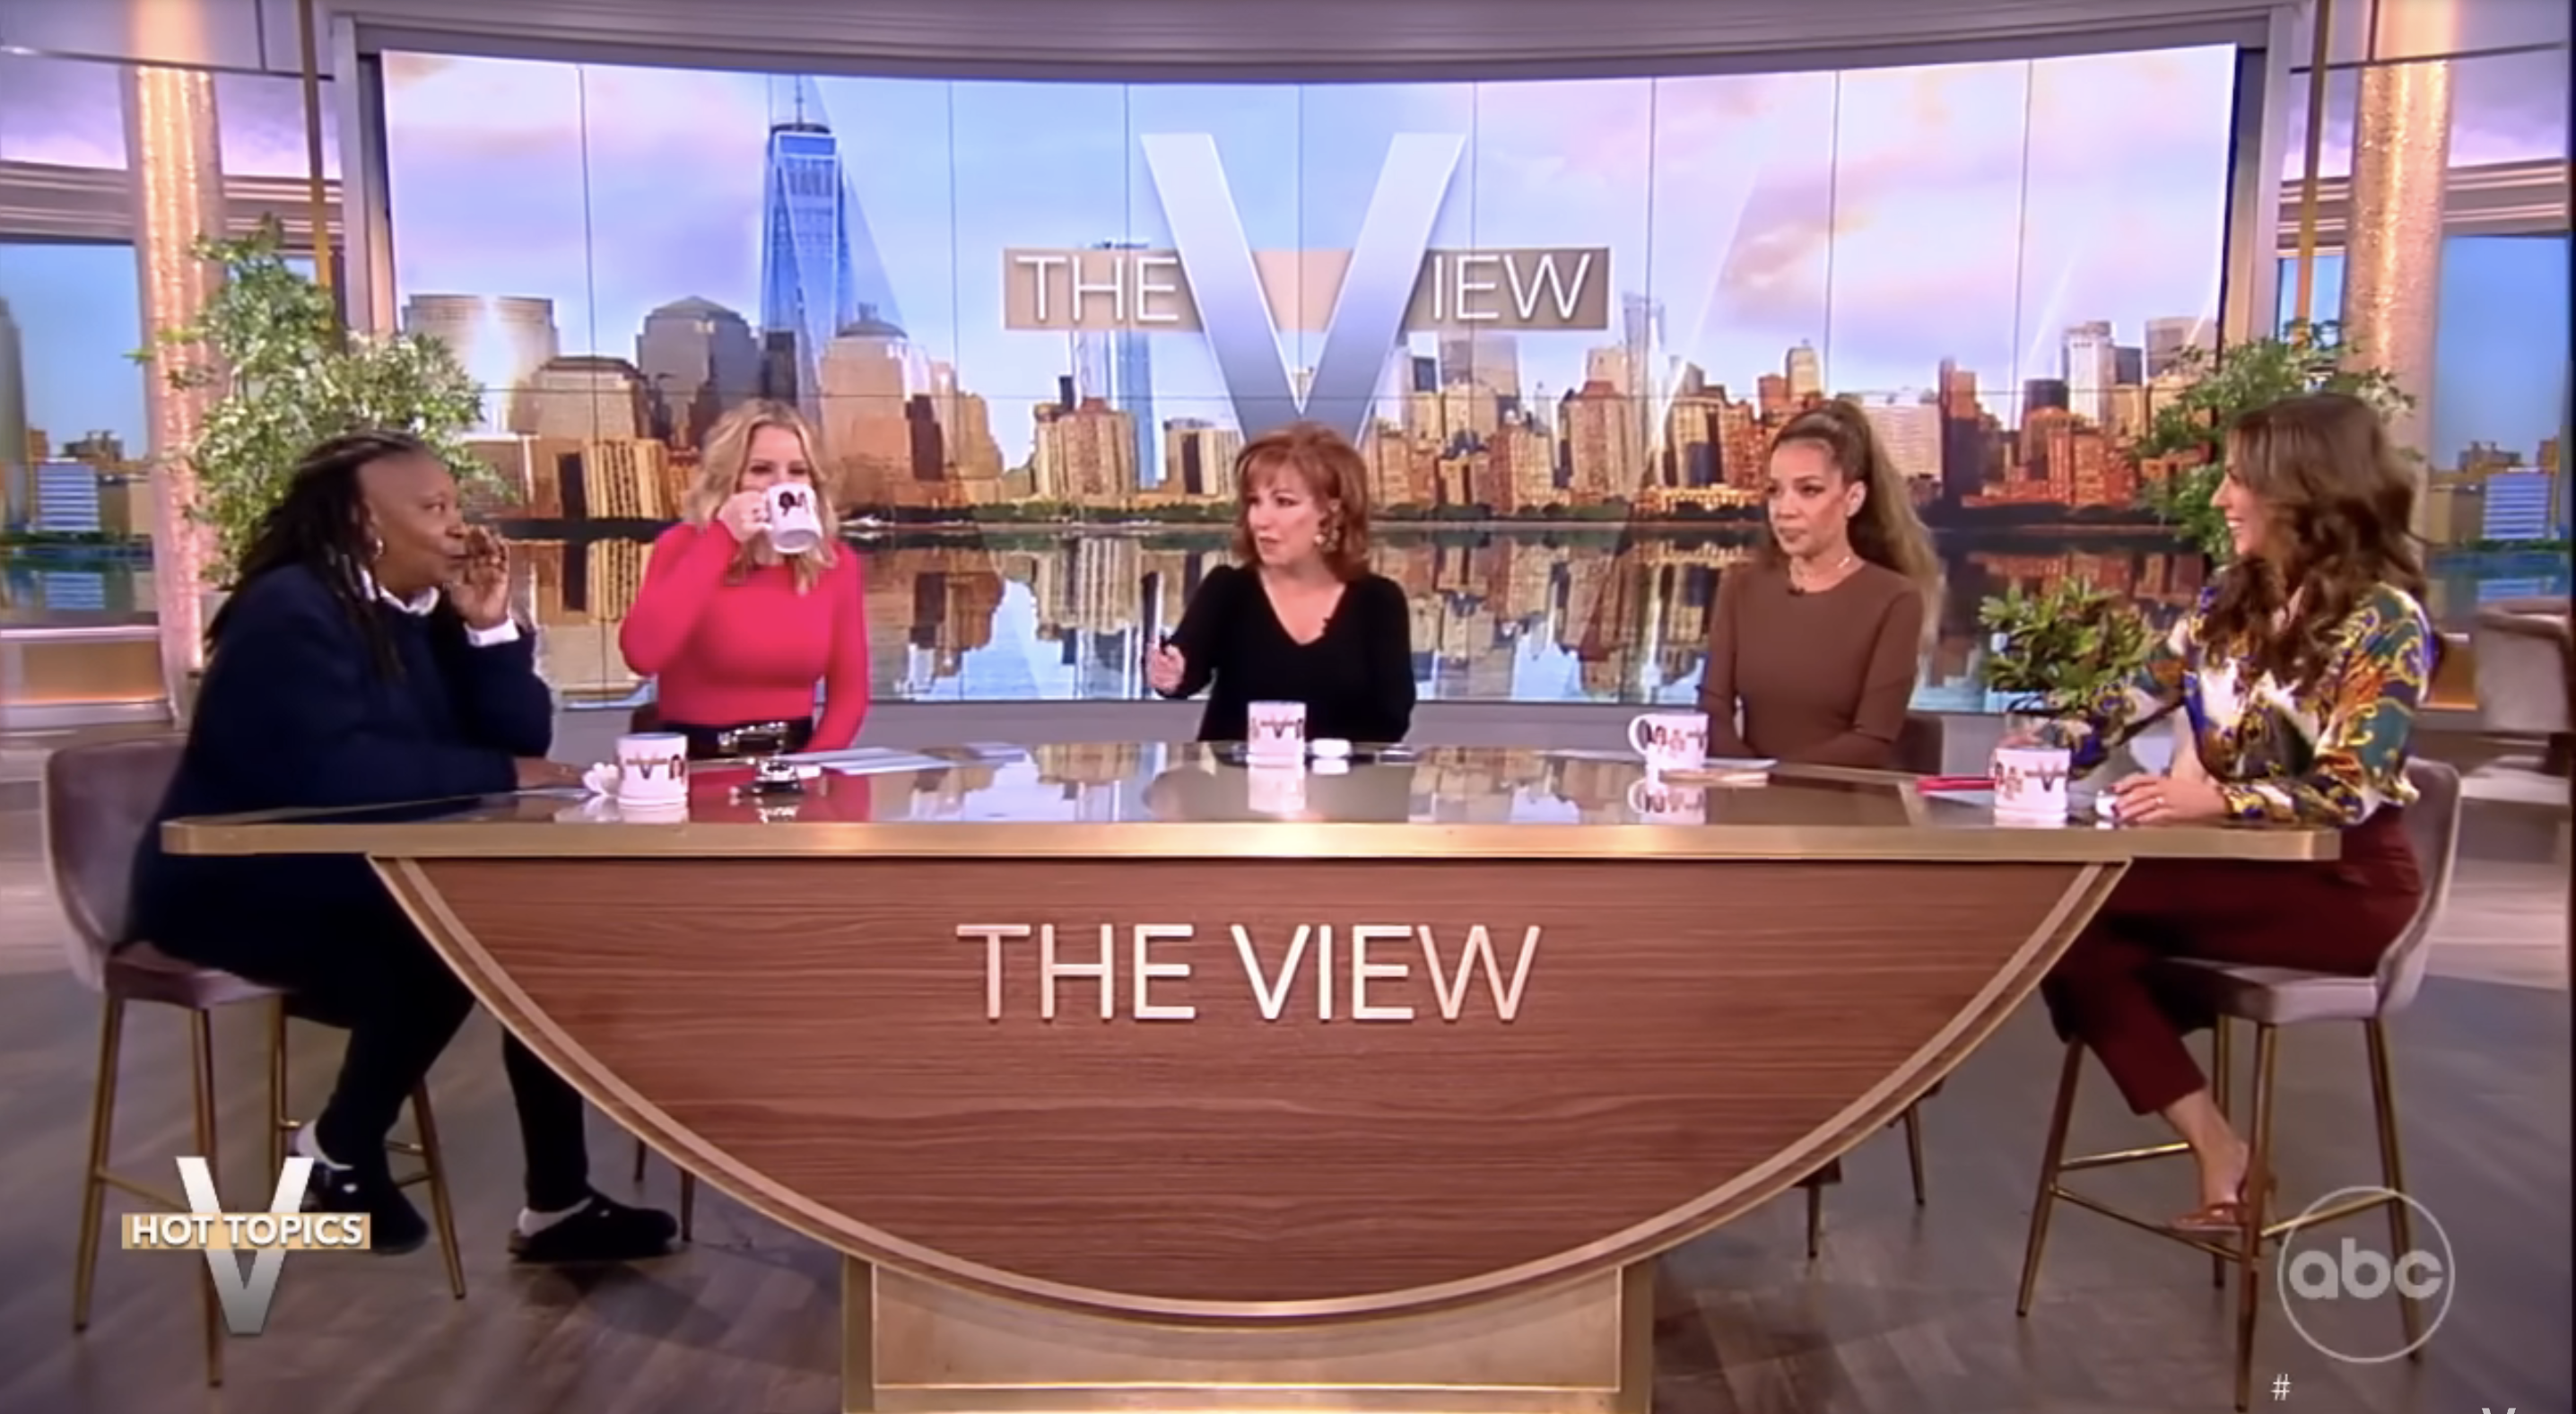 The hosts of &quot;The View&quot; sitting at their table